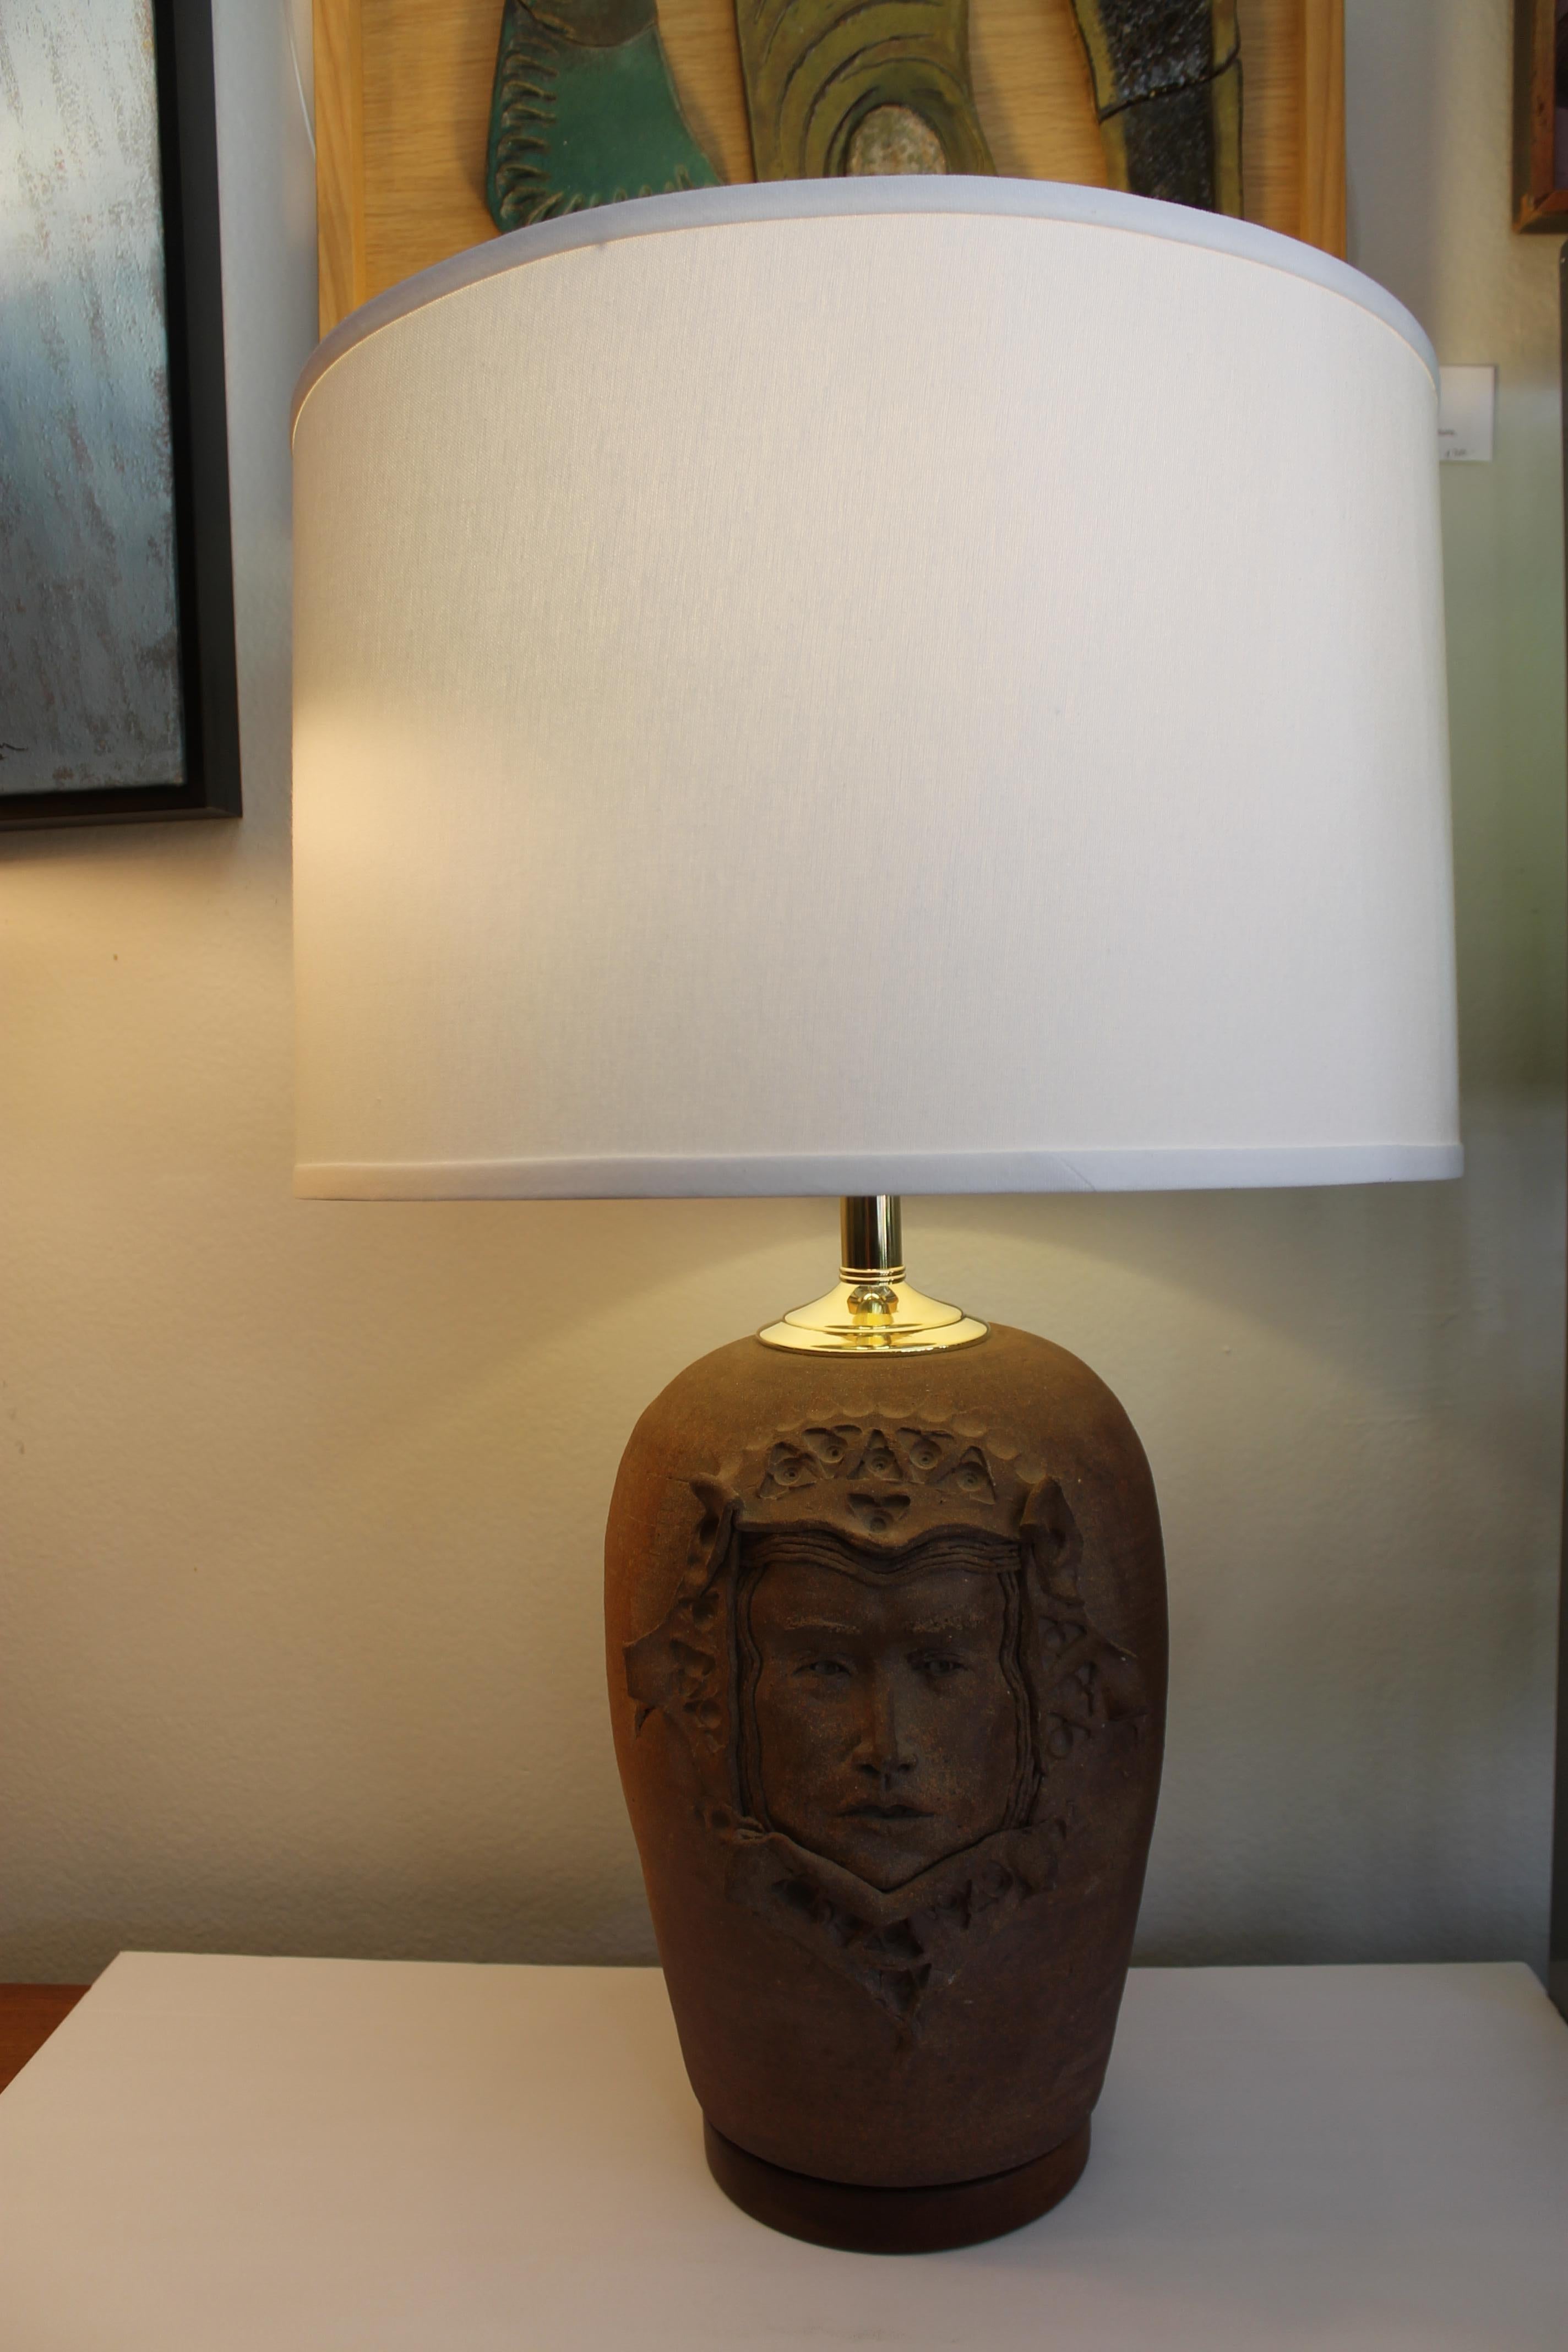 Ceramic lamp with a gothic face. Lamp measures 19